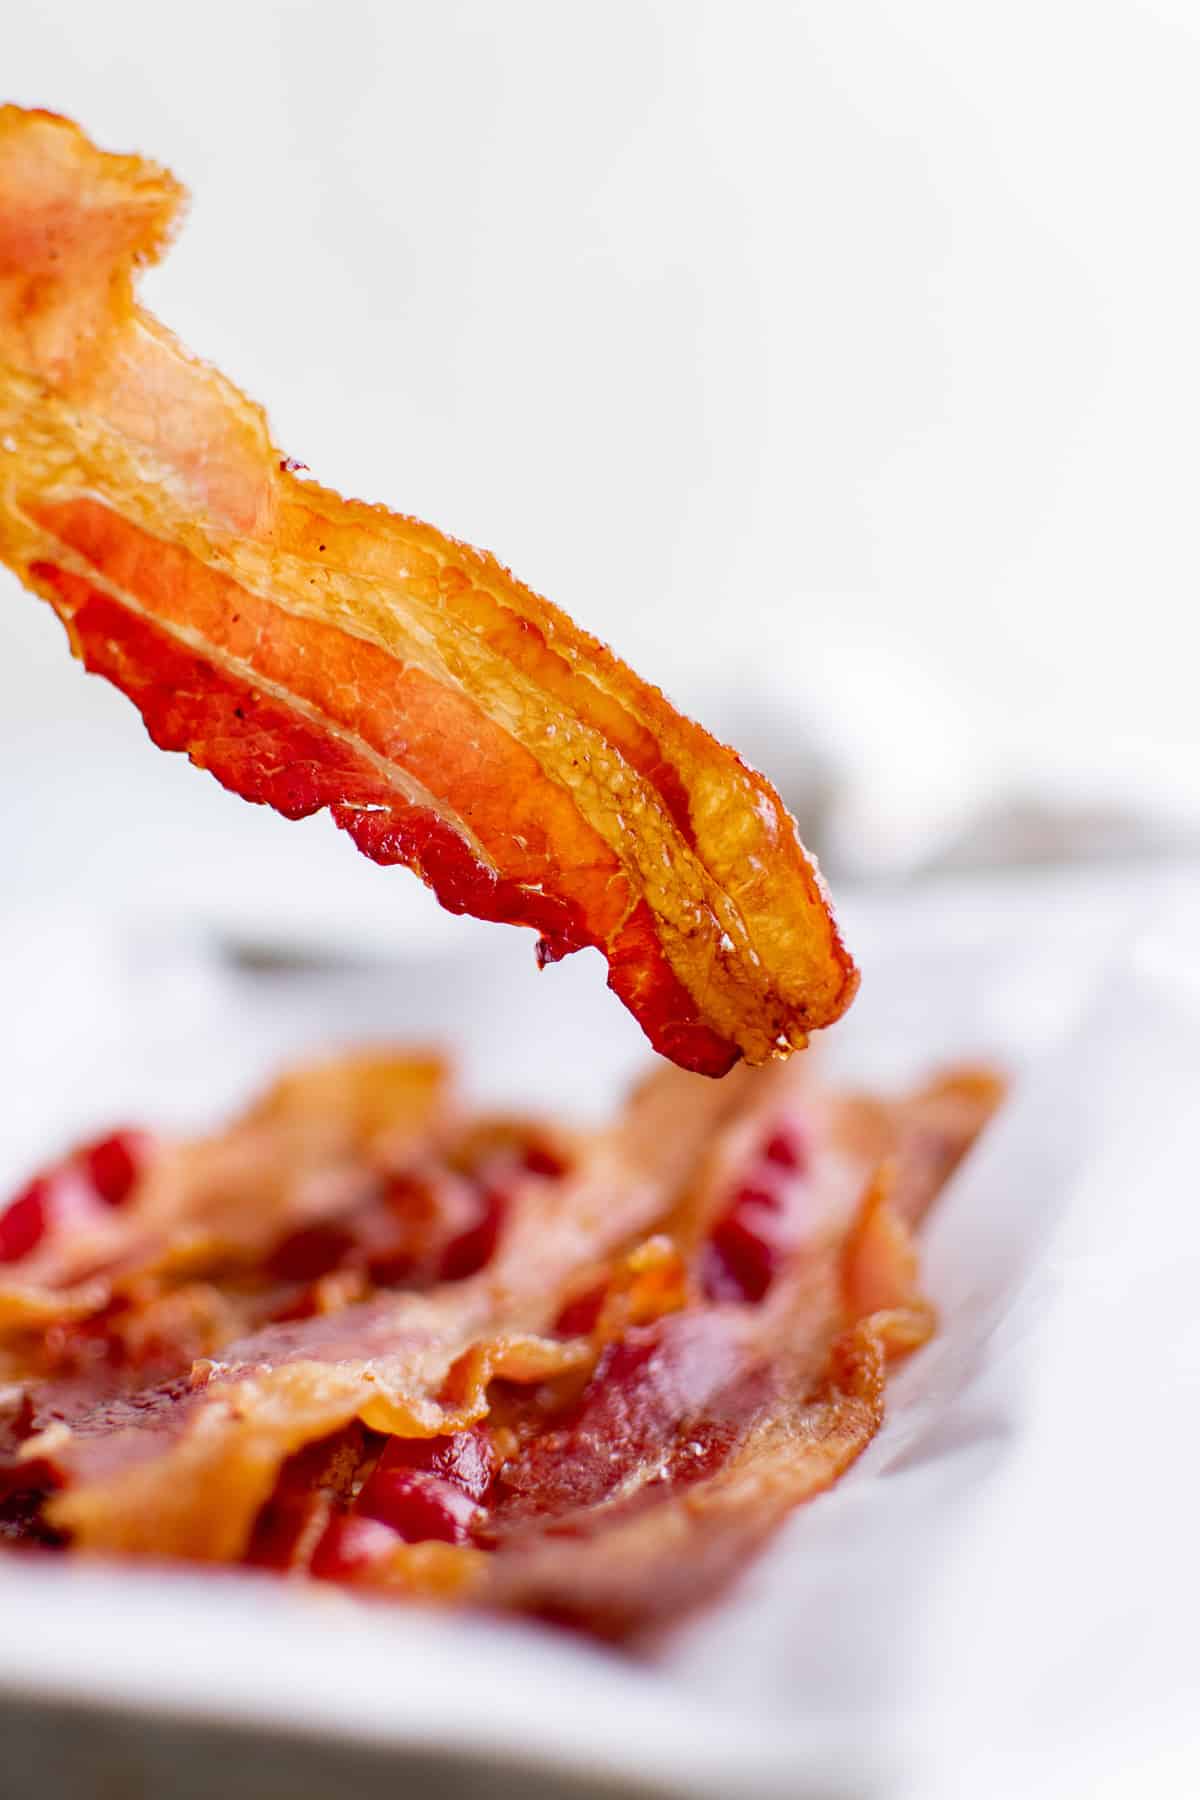 Piece of crispy bacon being held to show texture.